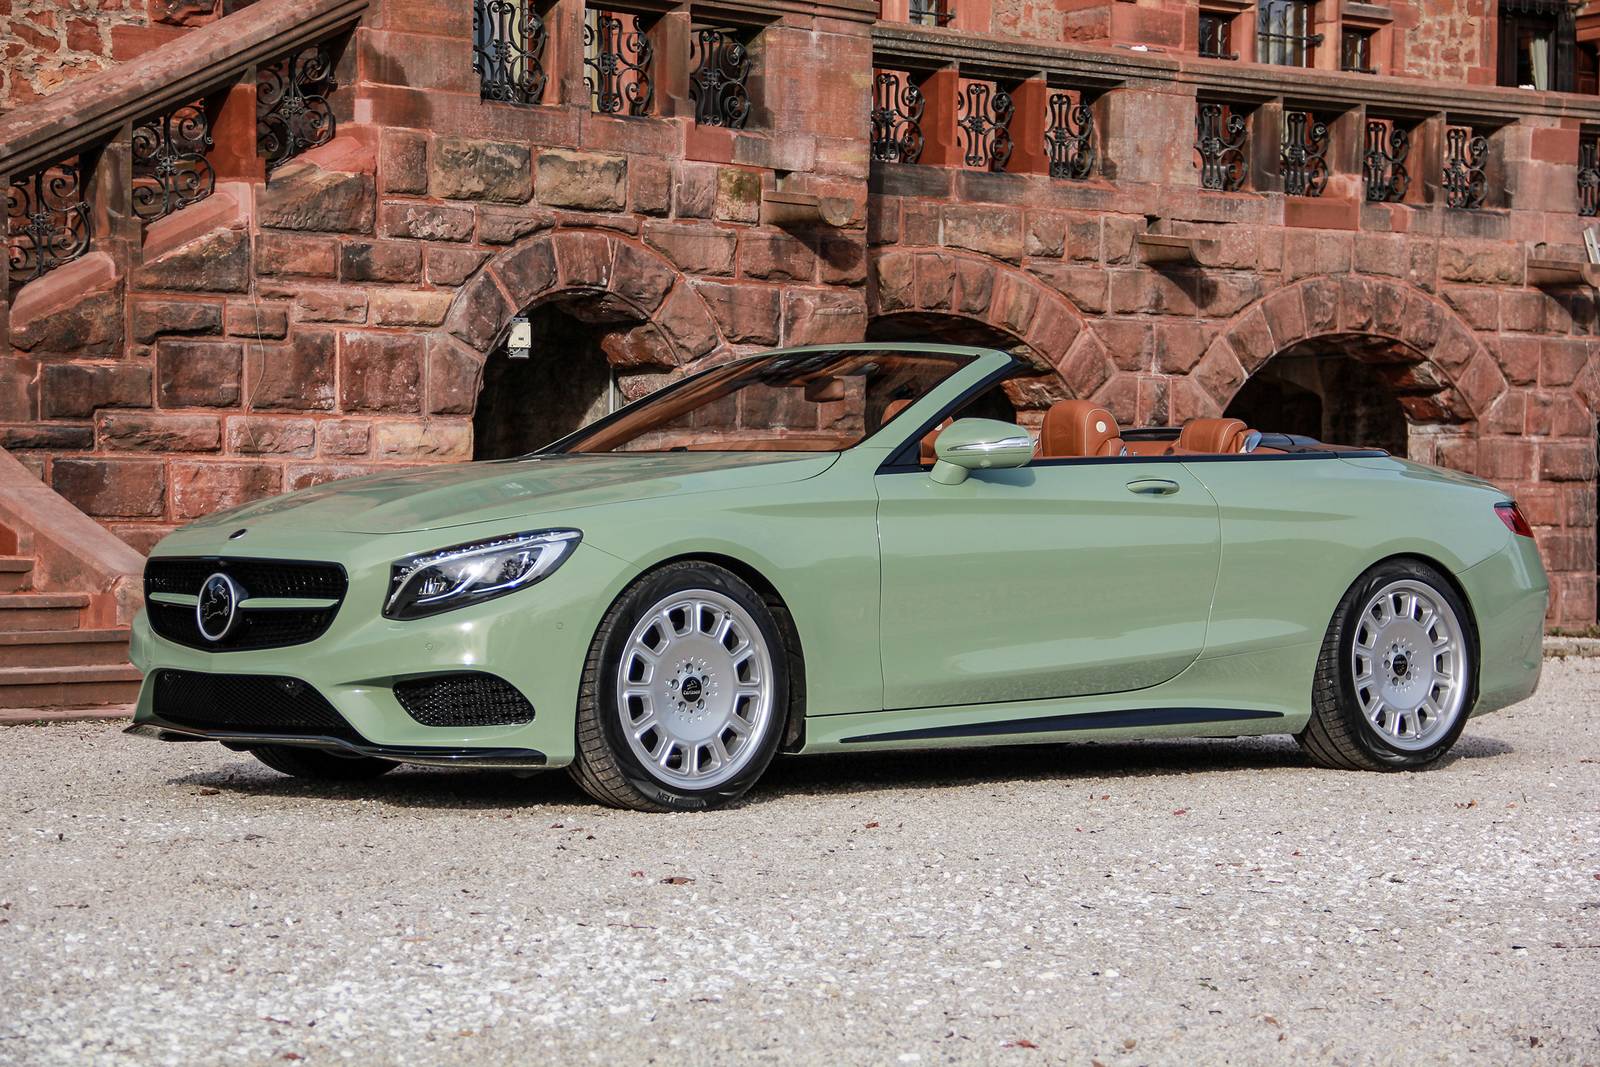 Do You Love or Loathe This Carlsson Mercedes S-Class?